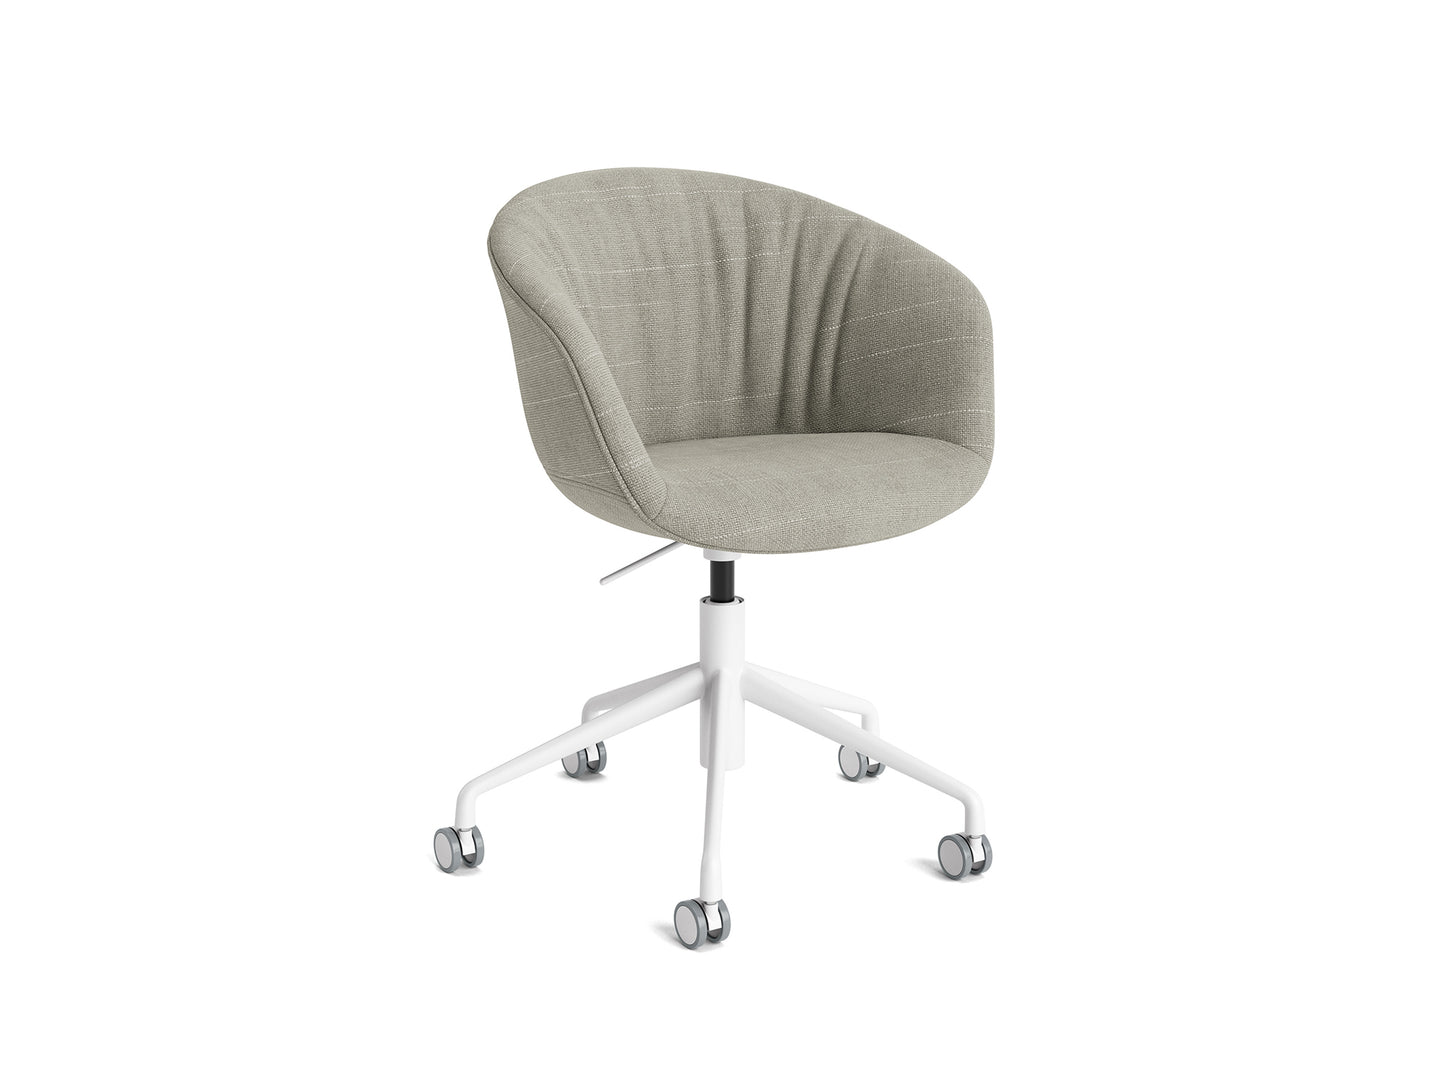 About A Chair AAC 53 Soft by HAY - Random Fade Beige / White Powder Coated Aluminium